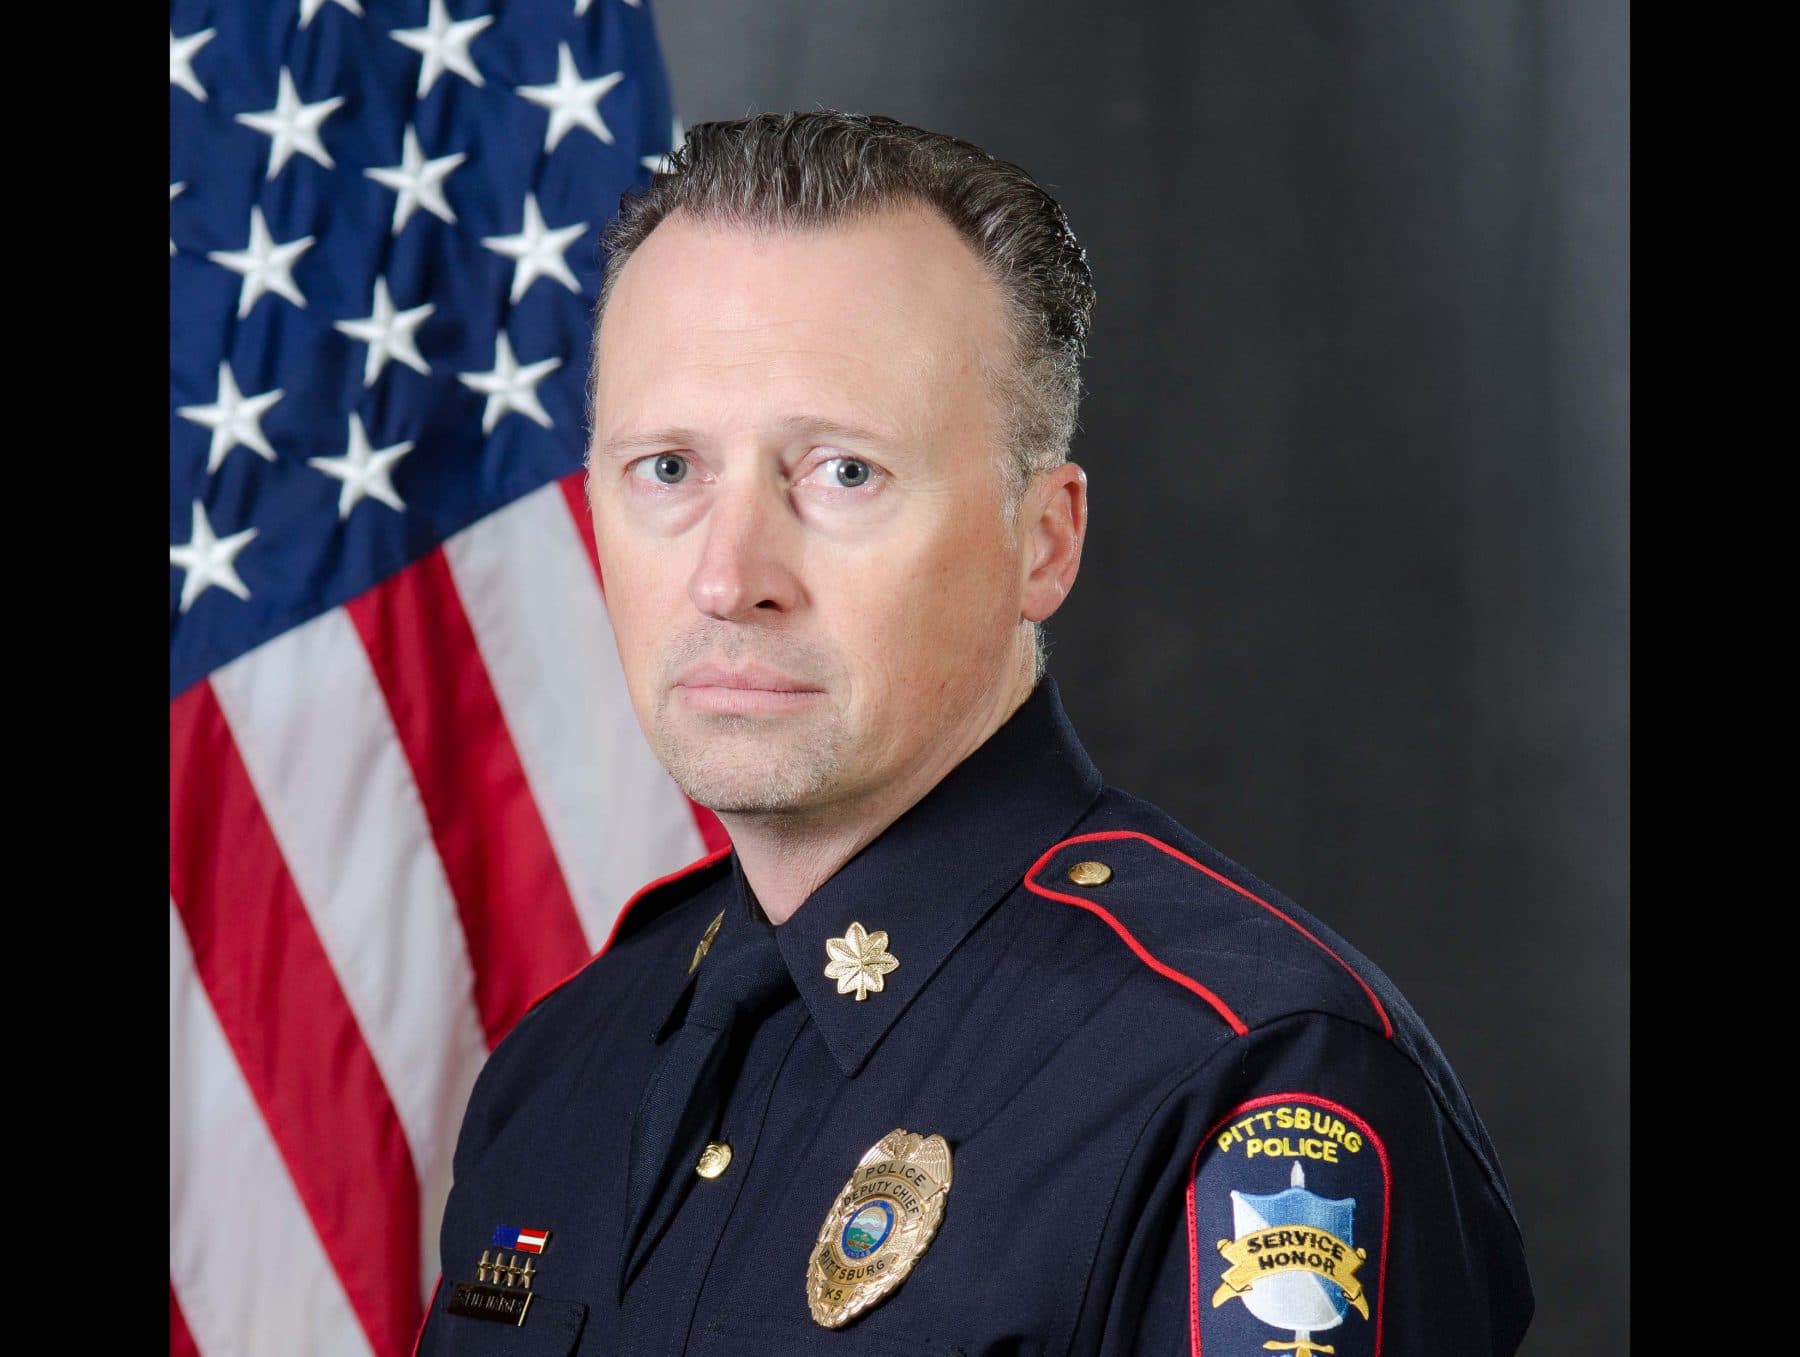 Major Brent Narges appointed interim police chief